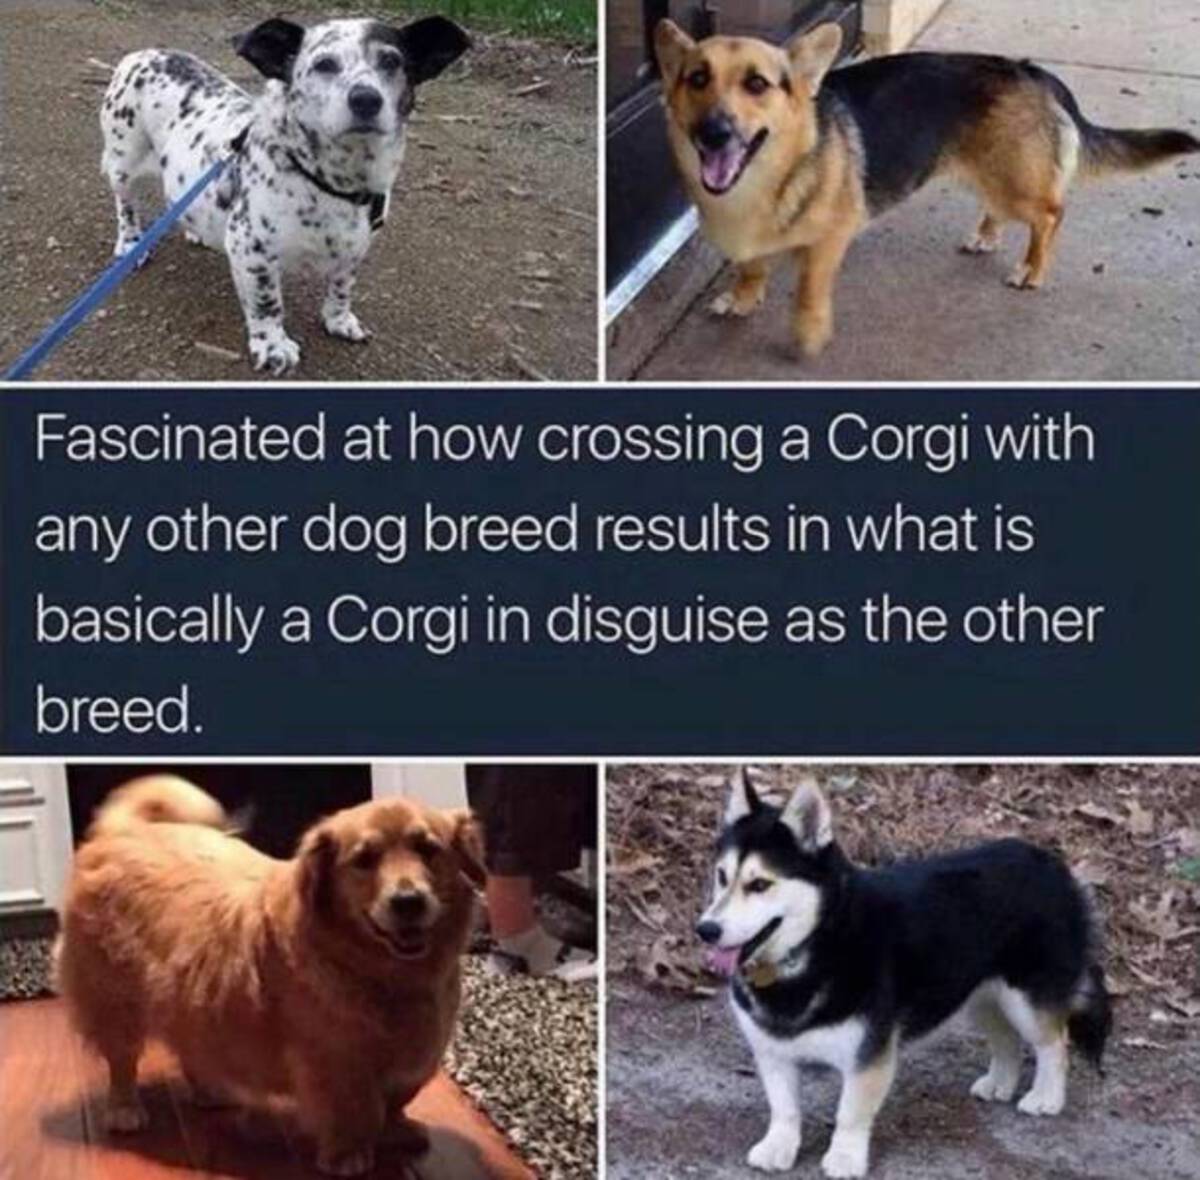 corgi with other breeds - Fascinated at how crossing a Corgi with any other dog breed results in what is basically a Corgi in disguise as the other breed.